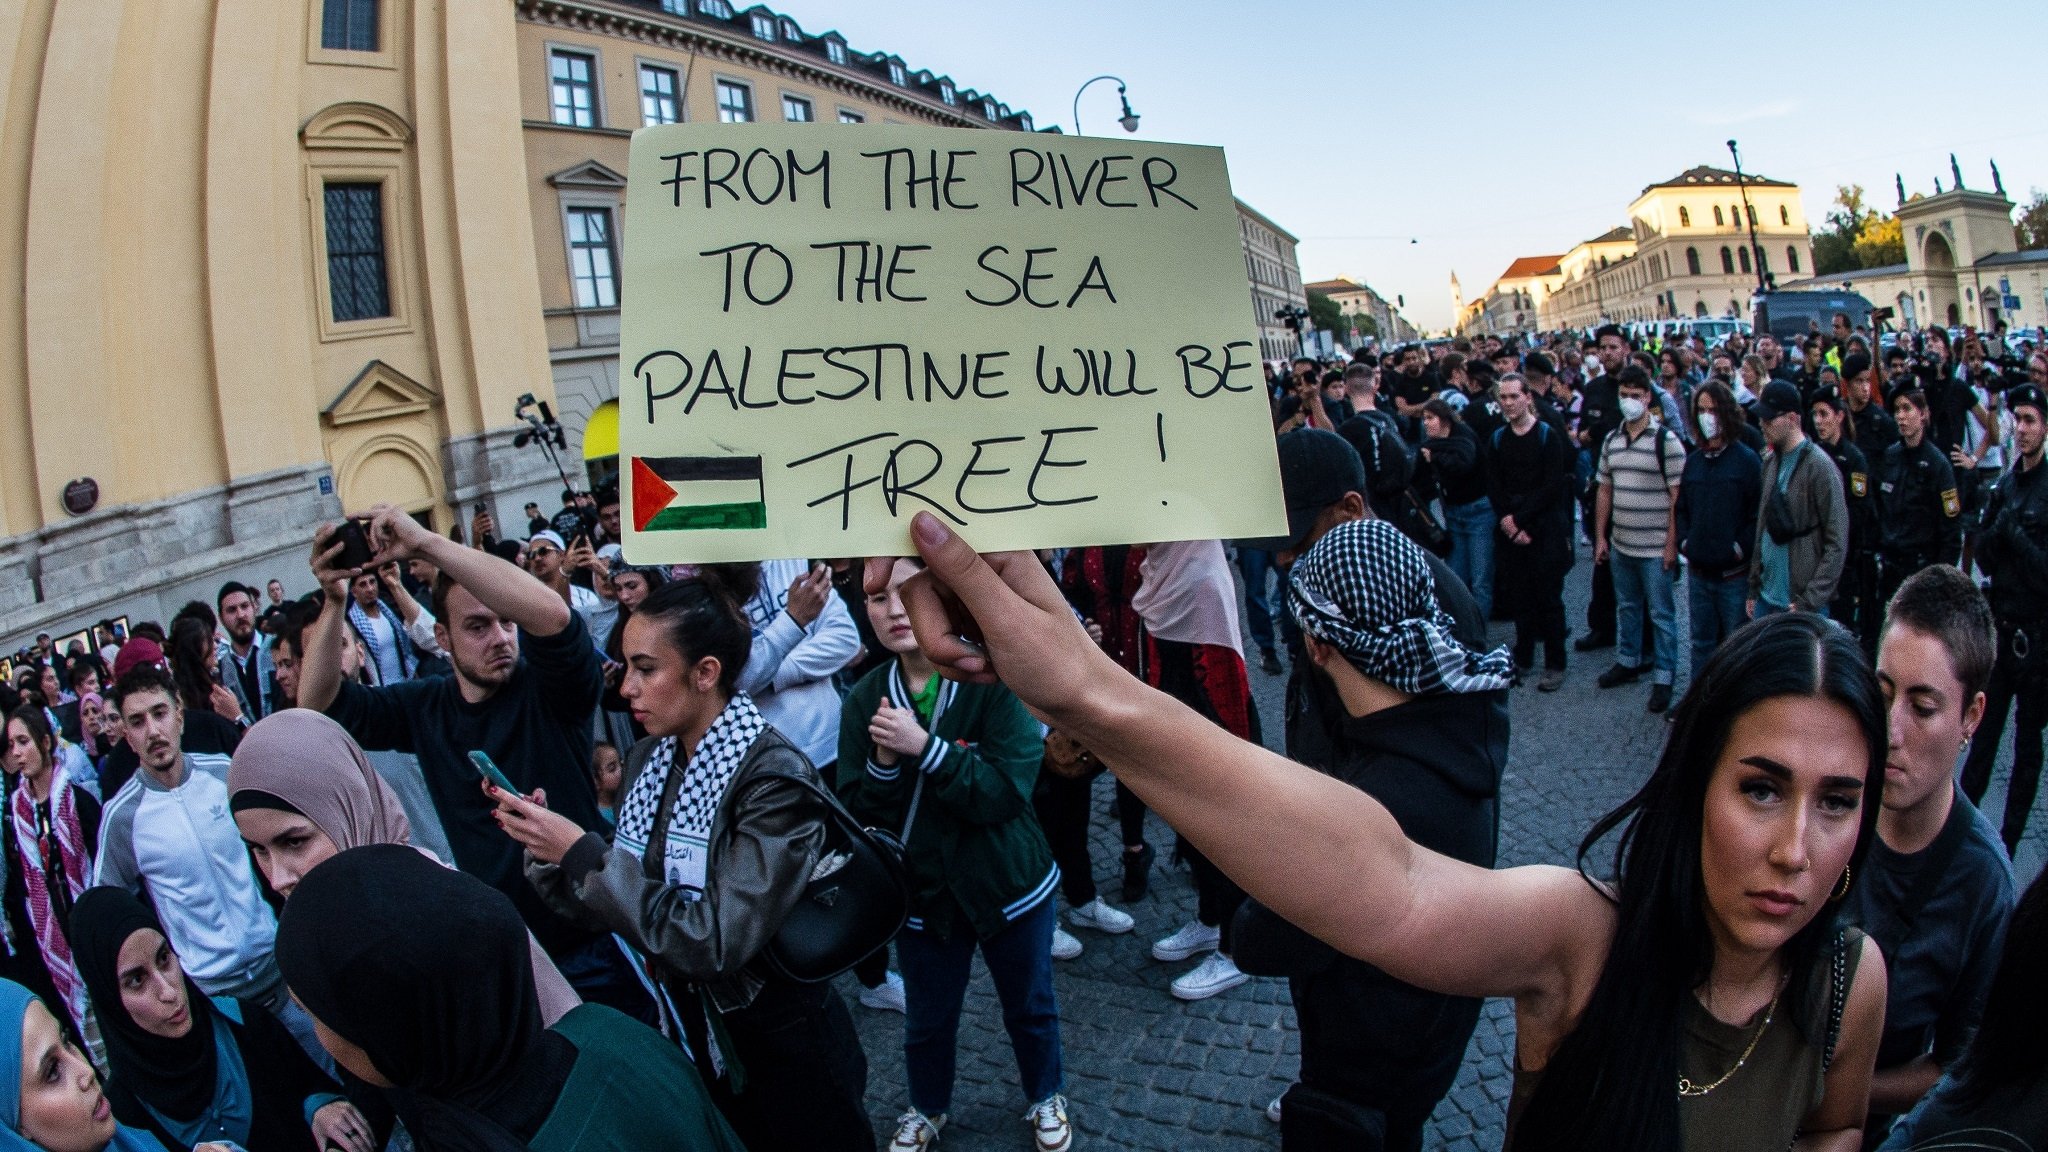 Demonstrantin mit dem Schild "From the River to the Sea, Palestine will be free", München 13.10.23